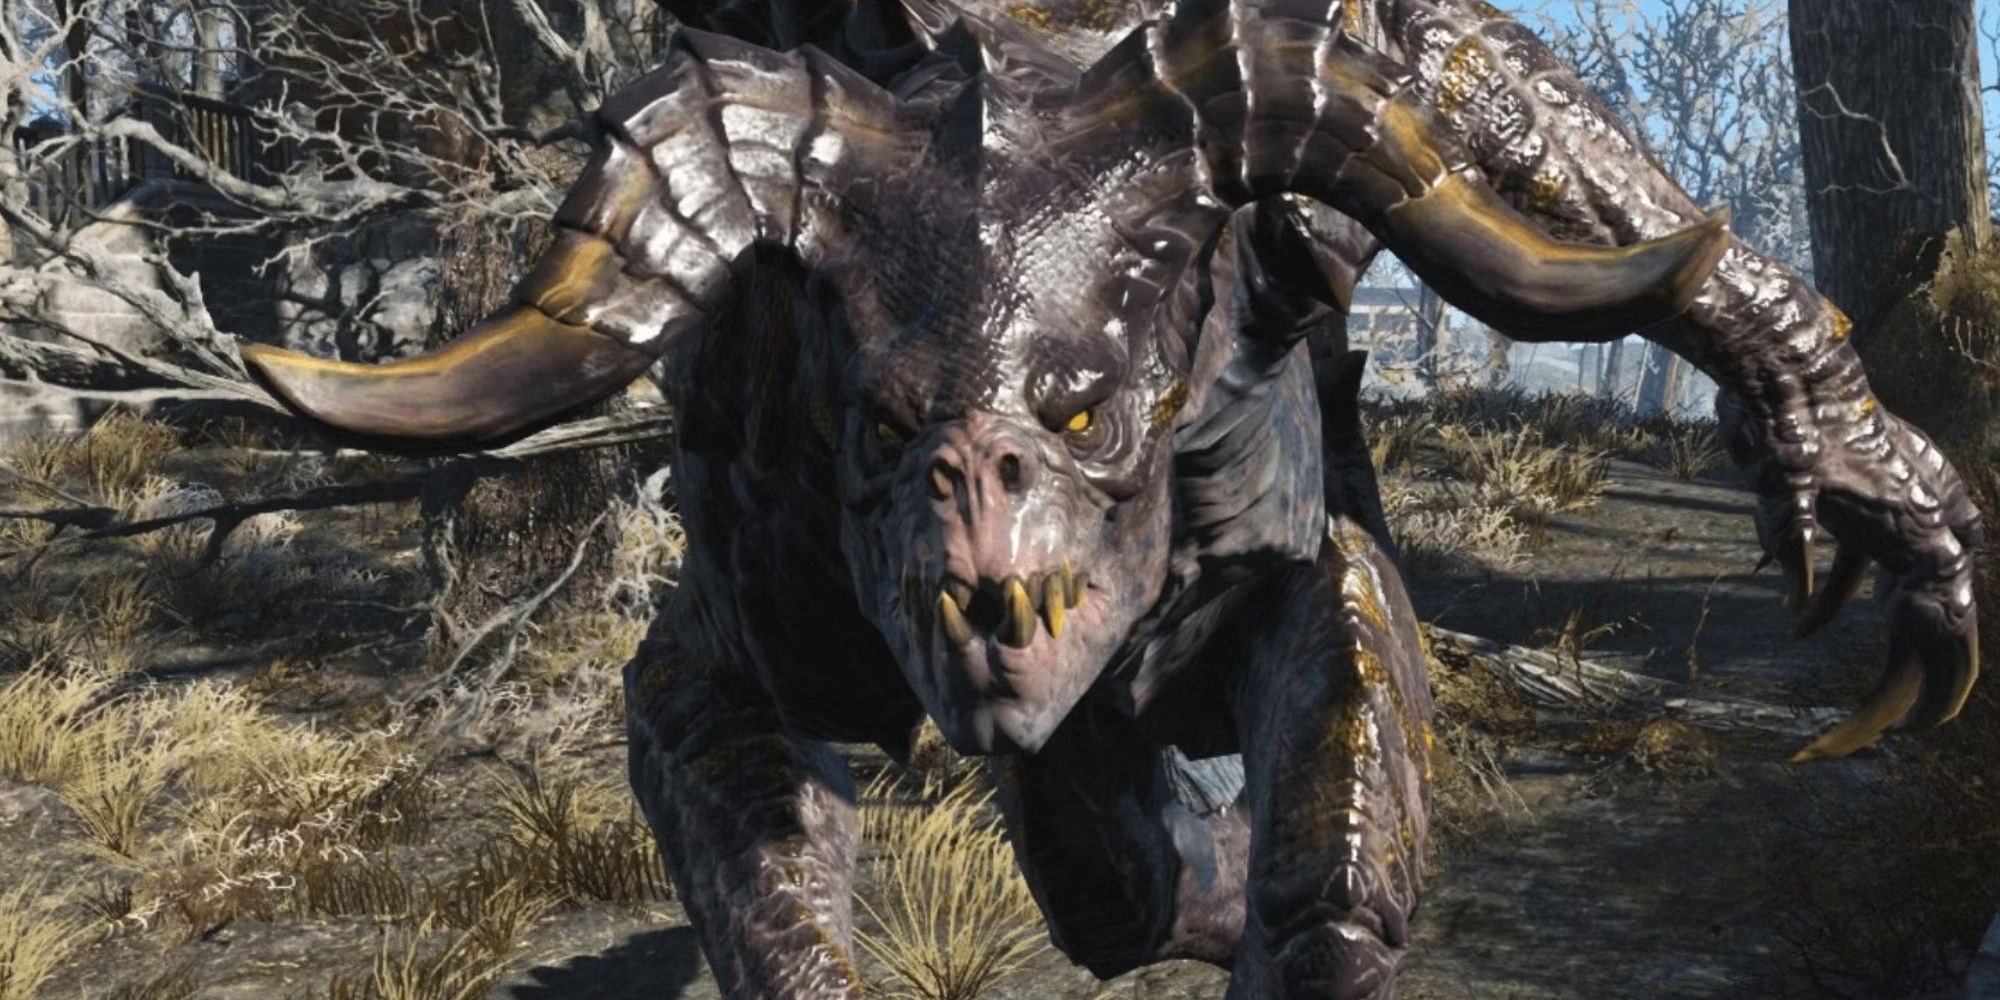 A Deathclaw sprinting through a forest in Fallout 4